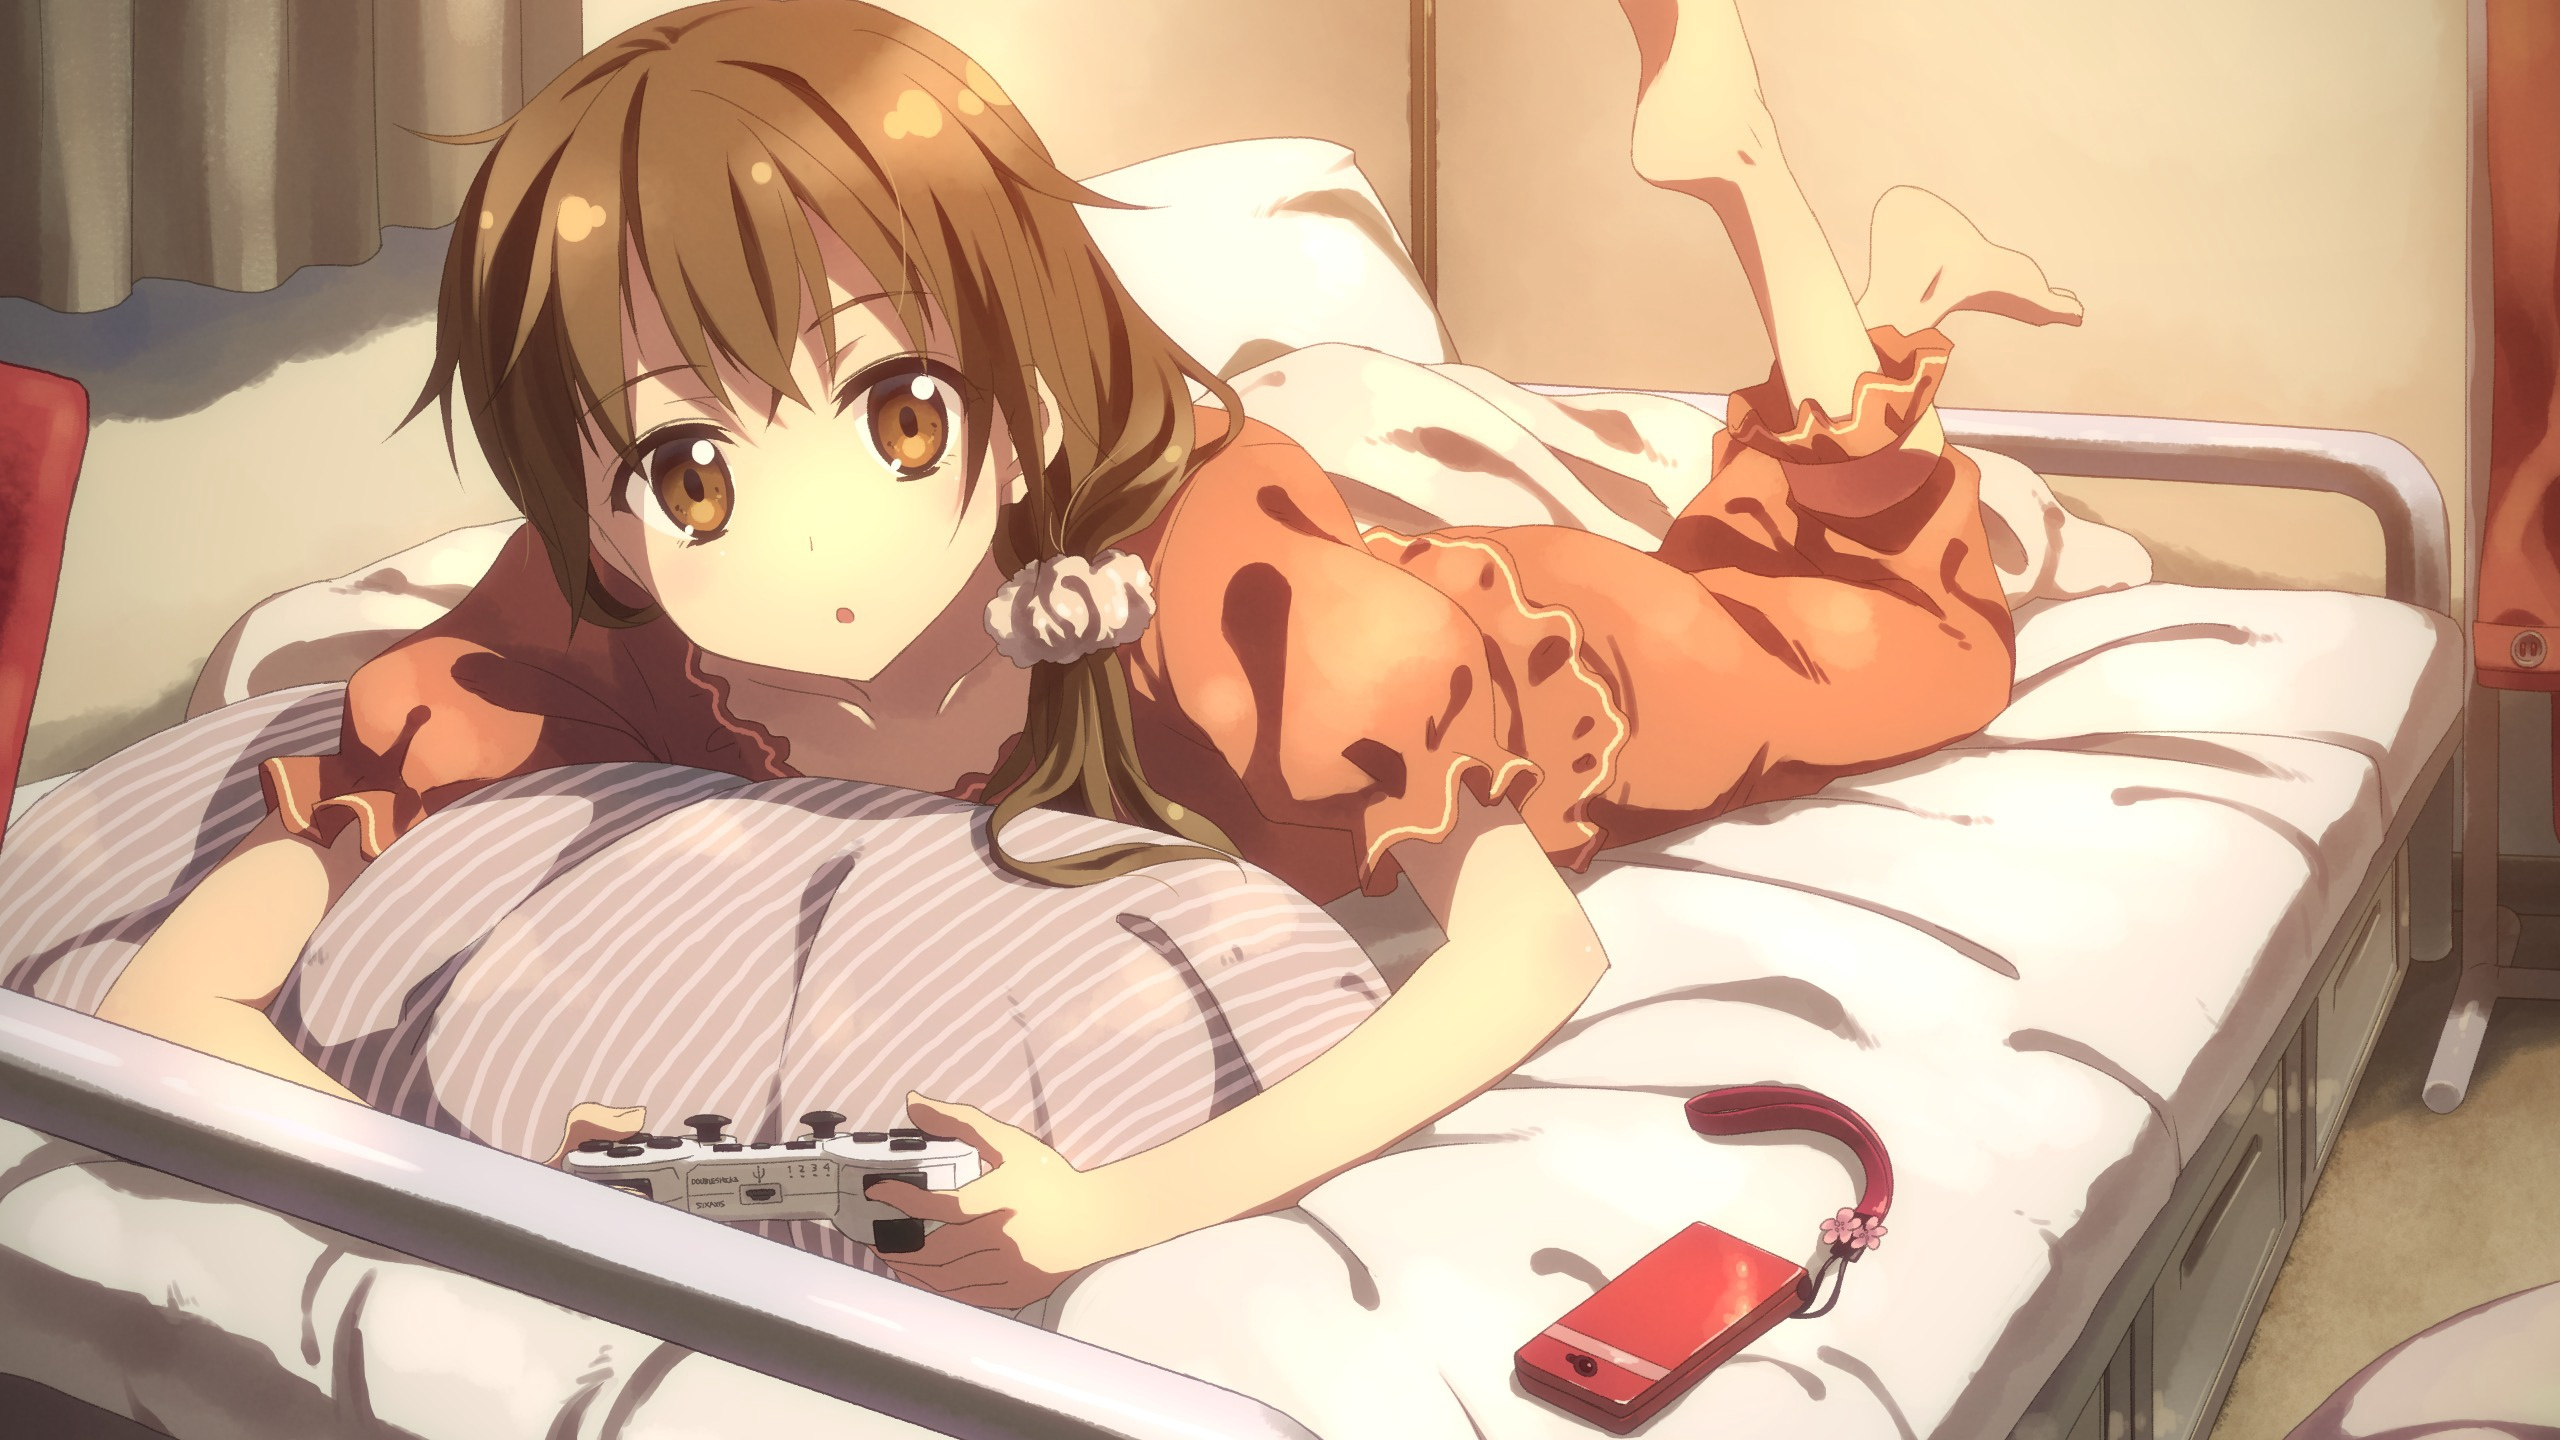 Brown Haired Girl Anime Character Lying on Bed. Wallpaper in 2560x1440 Resolution